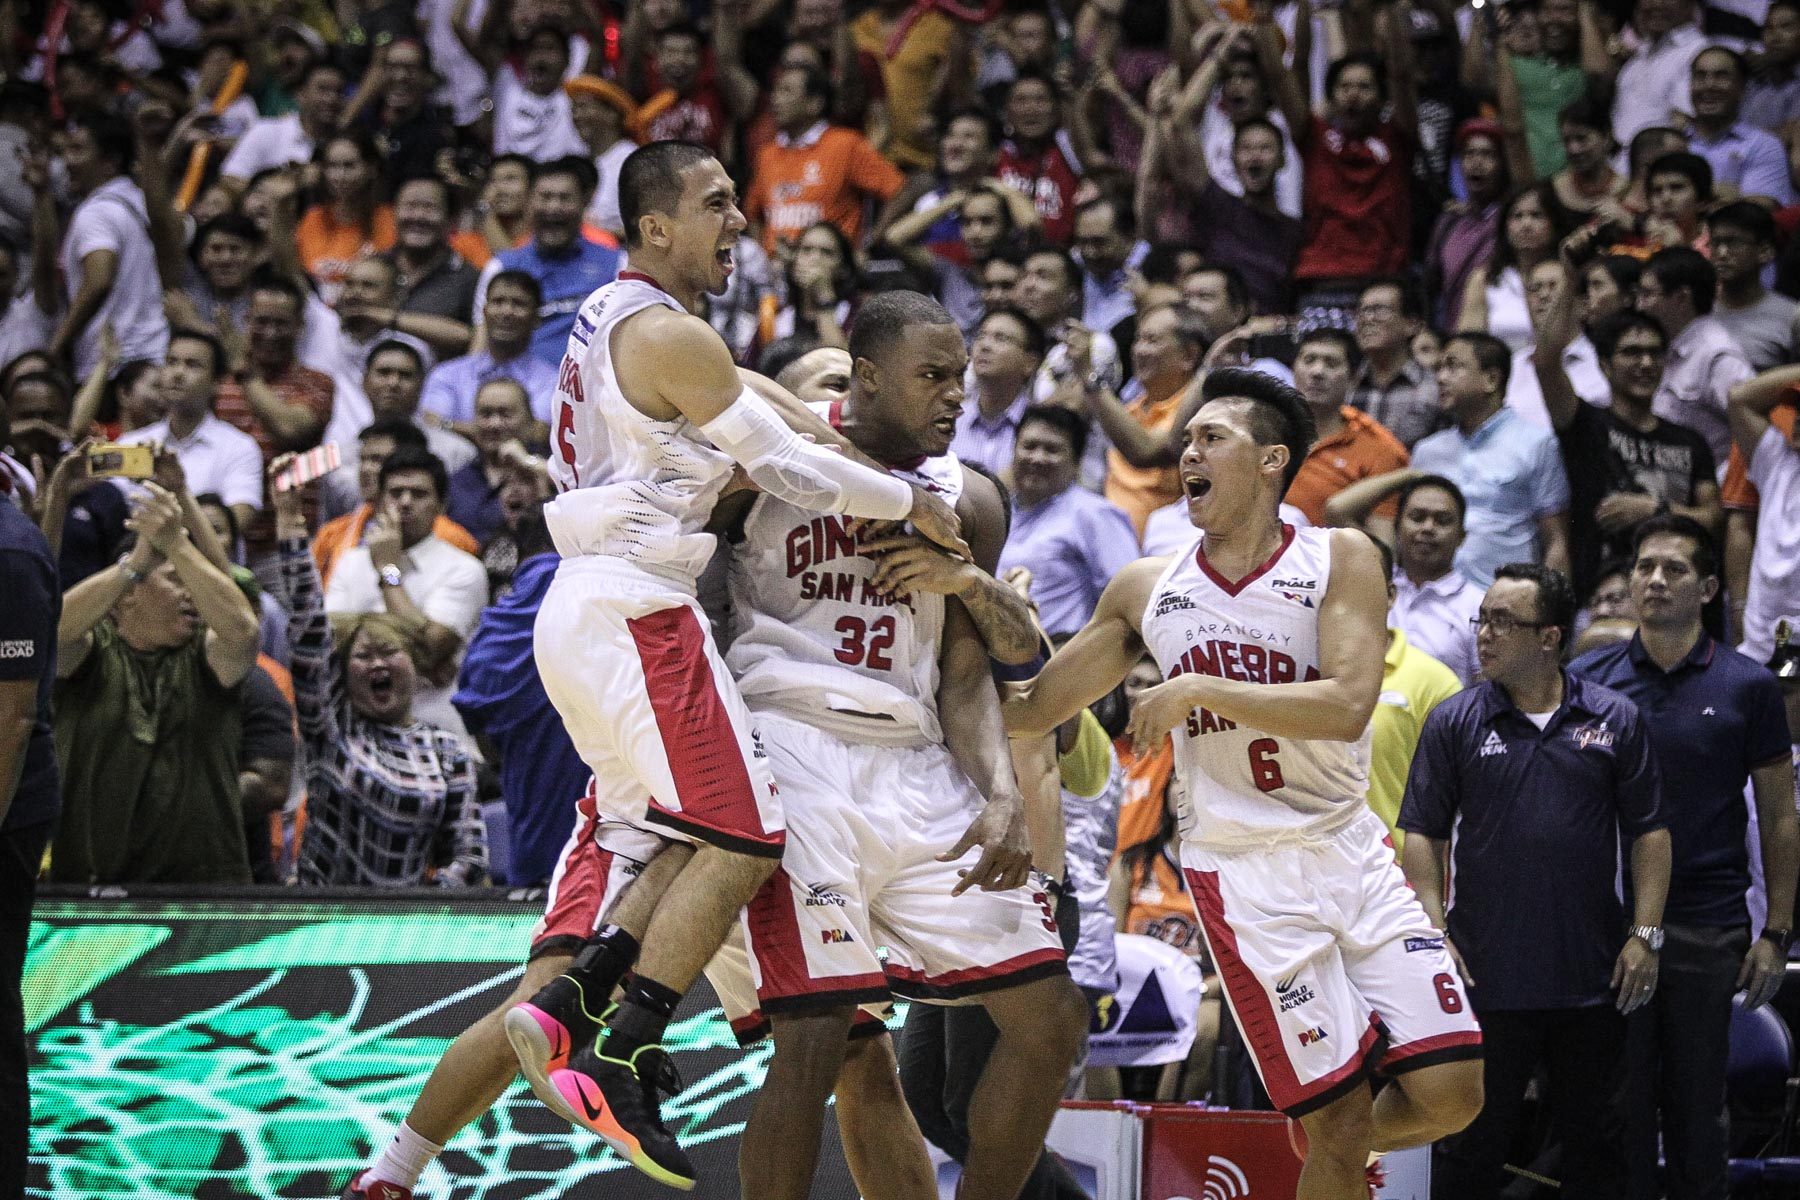 IN PHOTOS: Ginebra beats Meralco and rises to the top